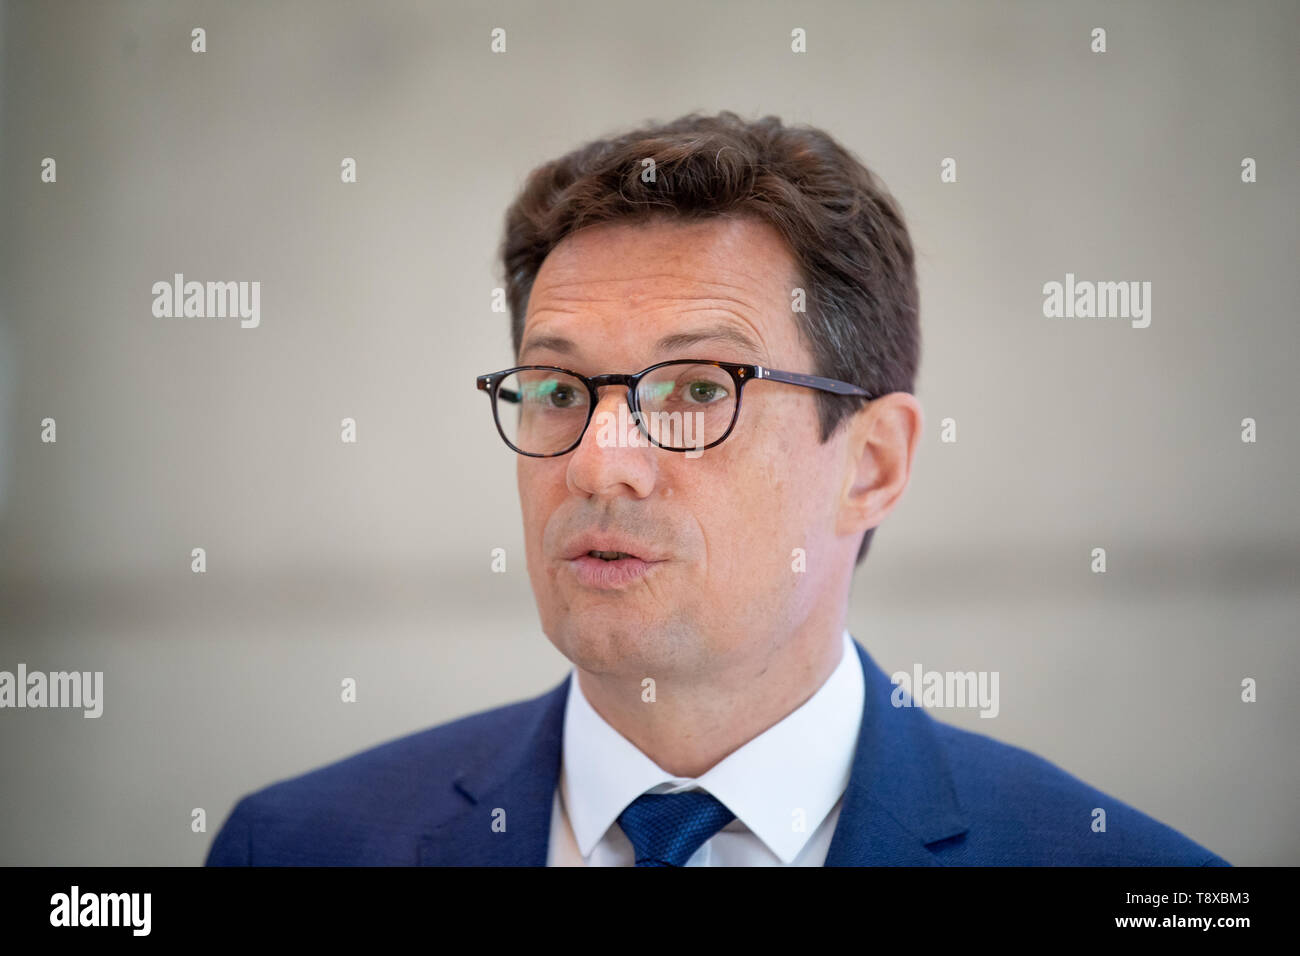 Stuttgart, Germany. 13th May, 2019. Michael Frick, member of the management board of Mahle GmbH, speaks at the annual press conference of the automotive supplier Mahle. Falling market shares for diesel and the global uncertainty caused by smouldering trade conflicts are causing Mahle problems. Credit: Fabian Sommer/dpa/Alamy Live News Stock Photo